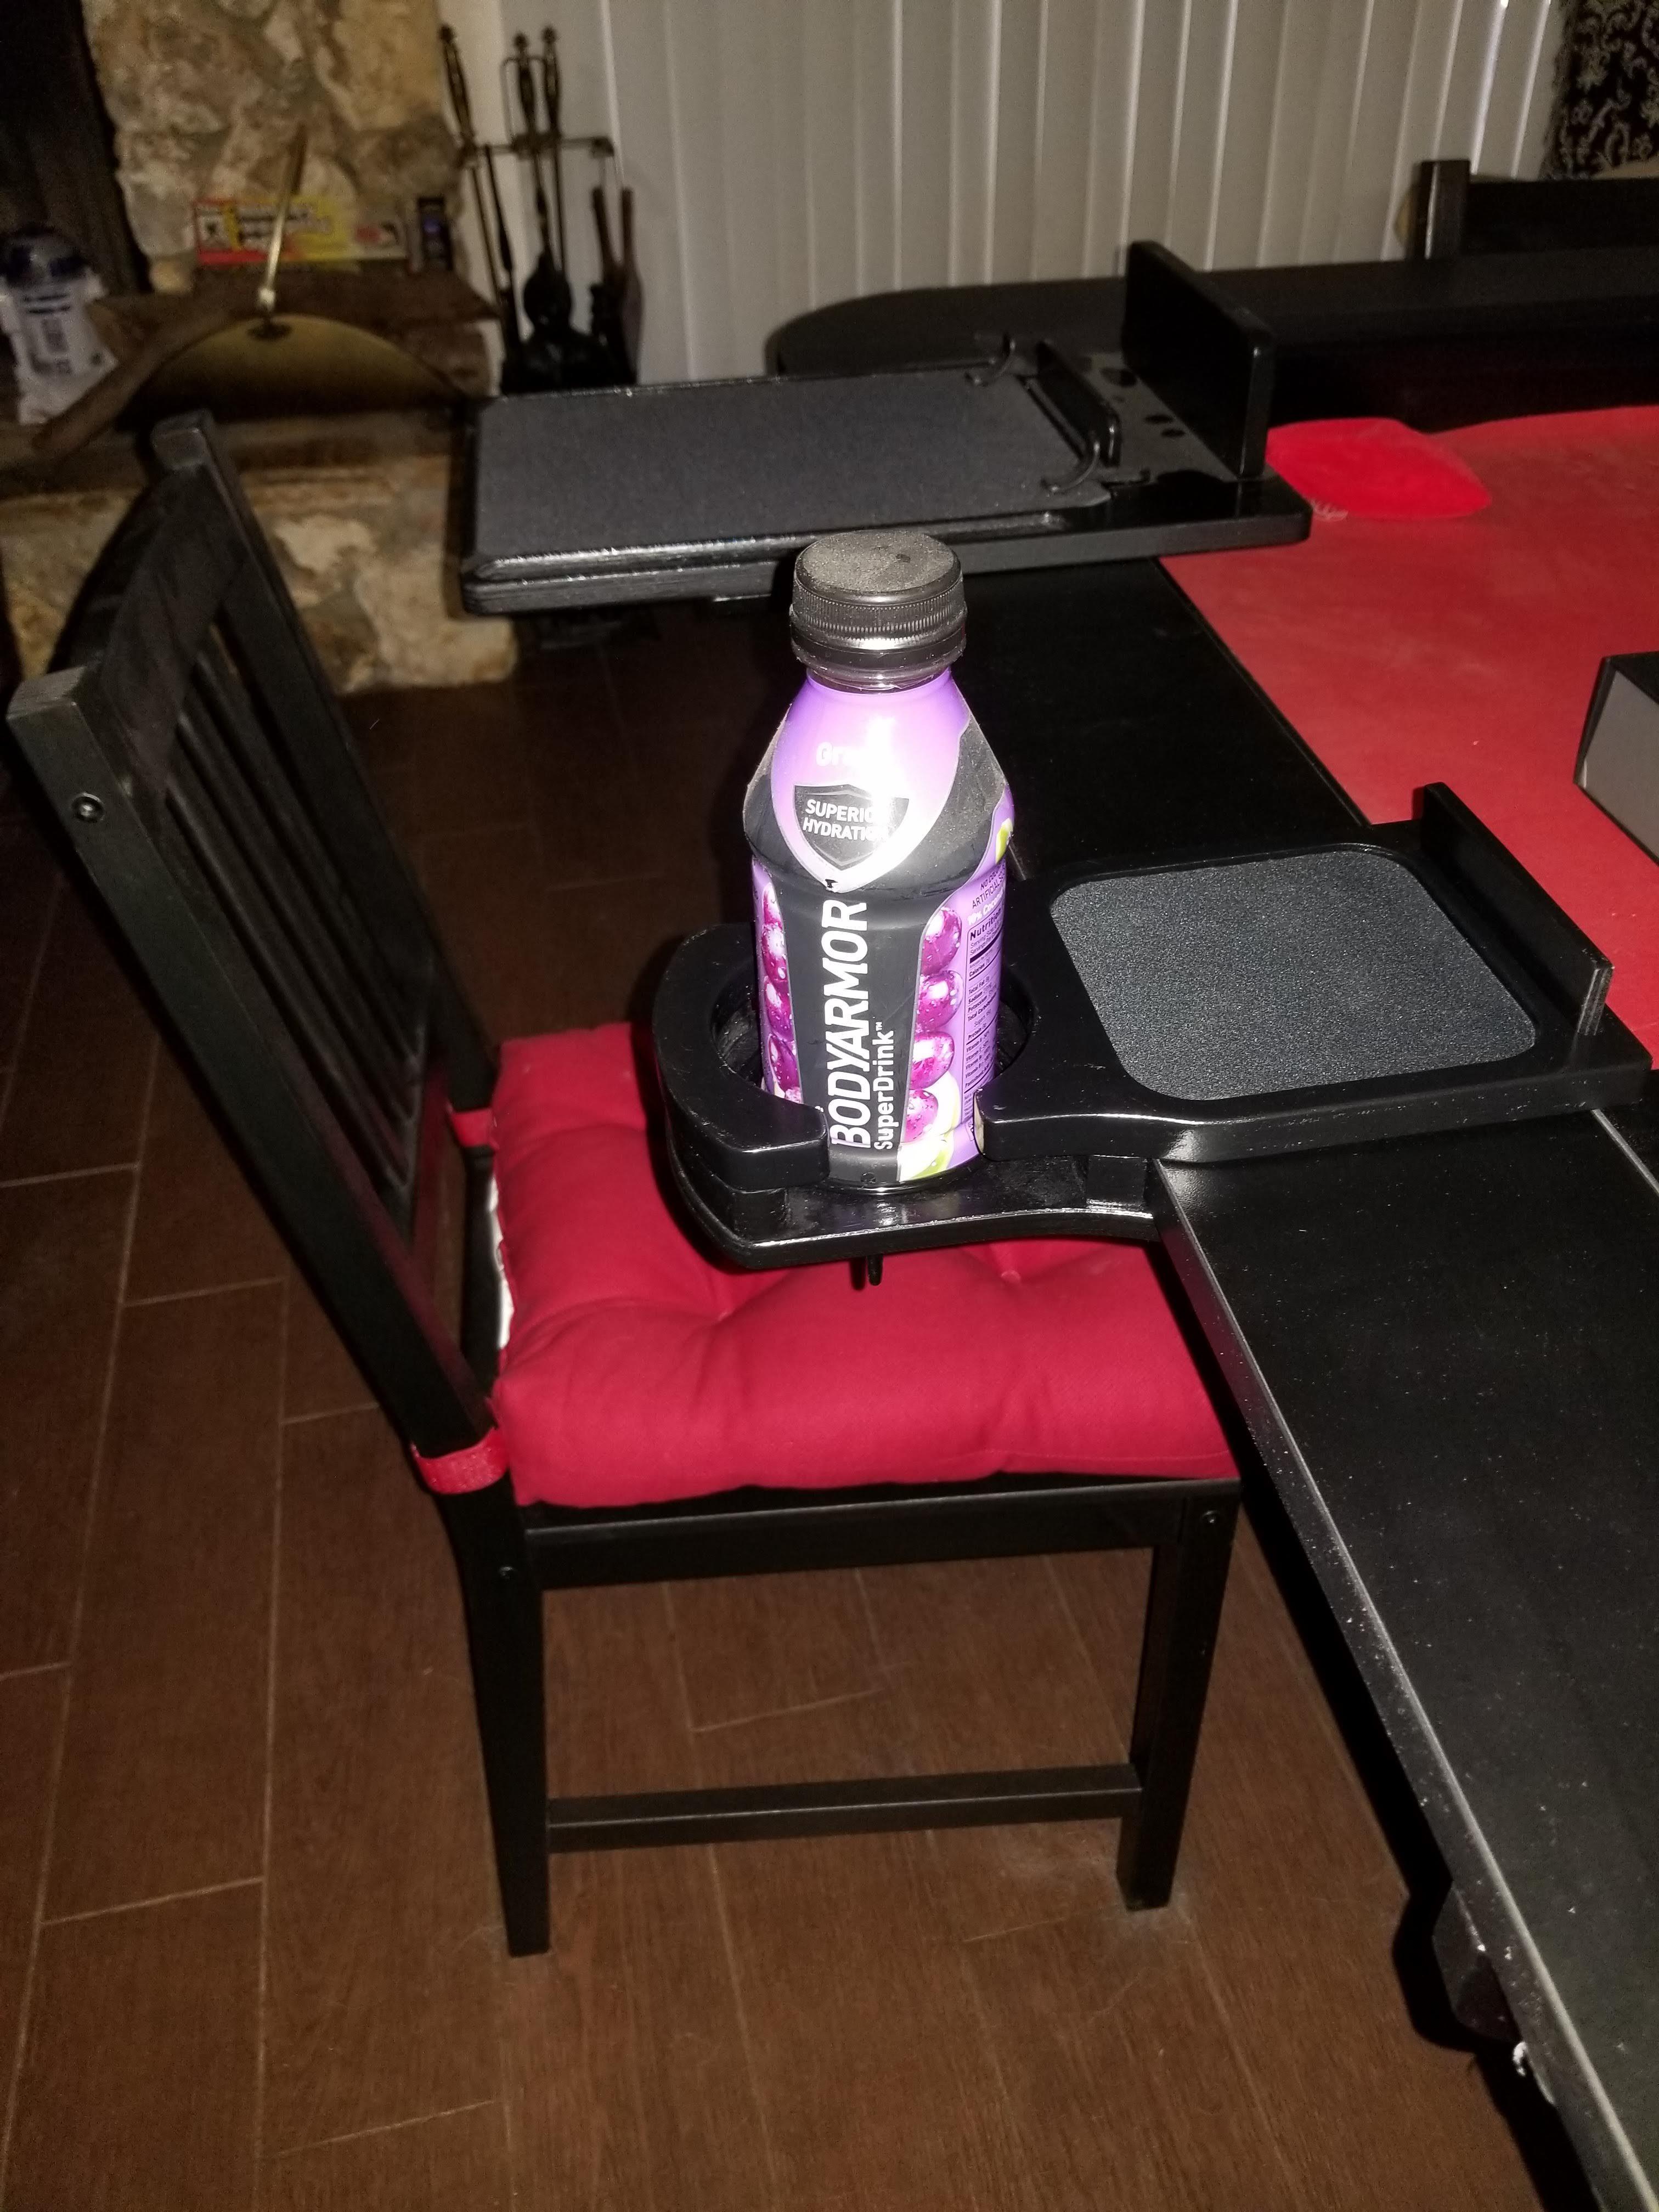 Is TableCoaster the ultimate anti-spill drink holder? - The Gadgeteer